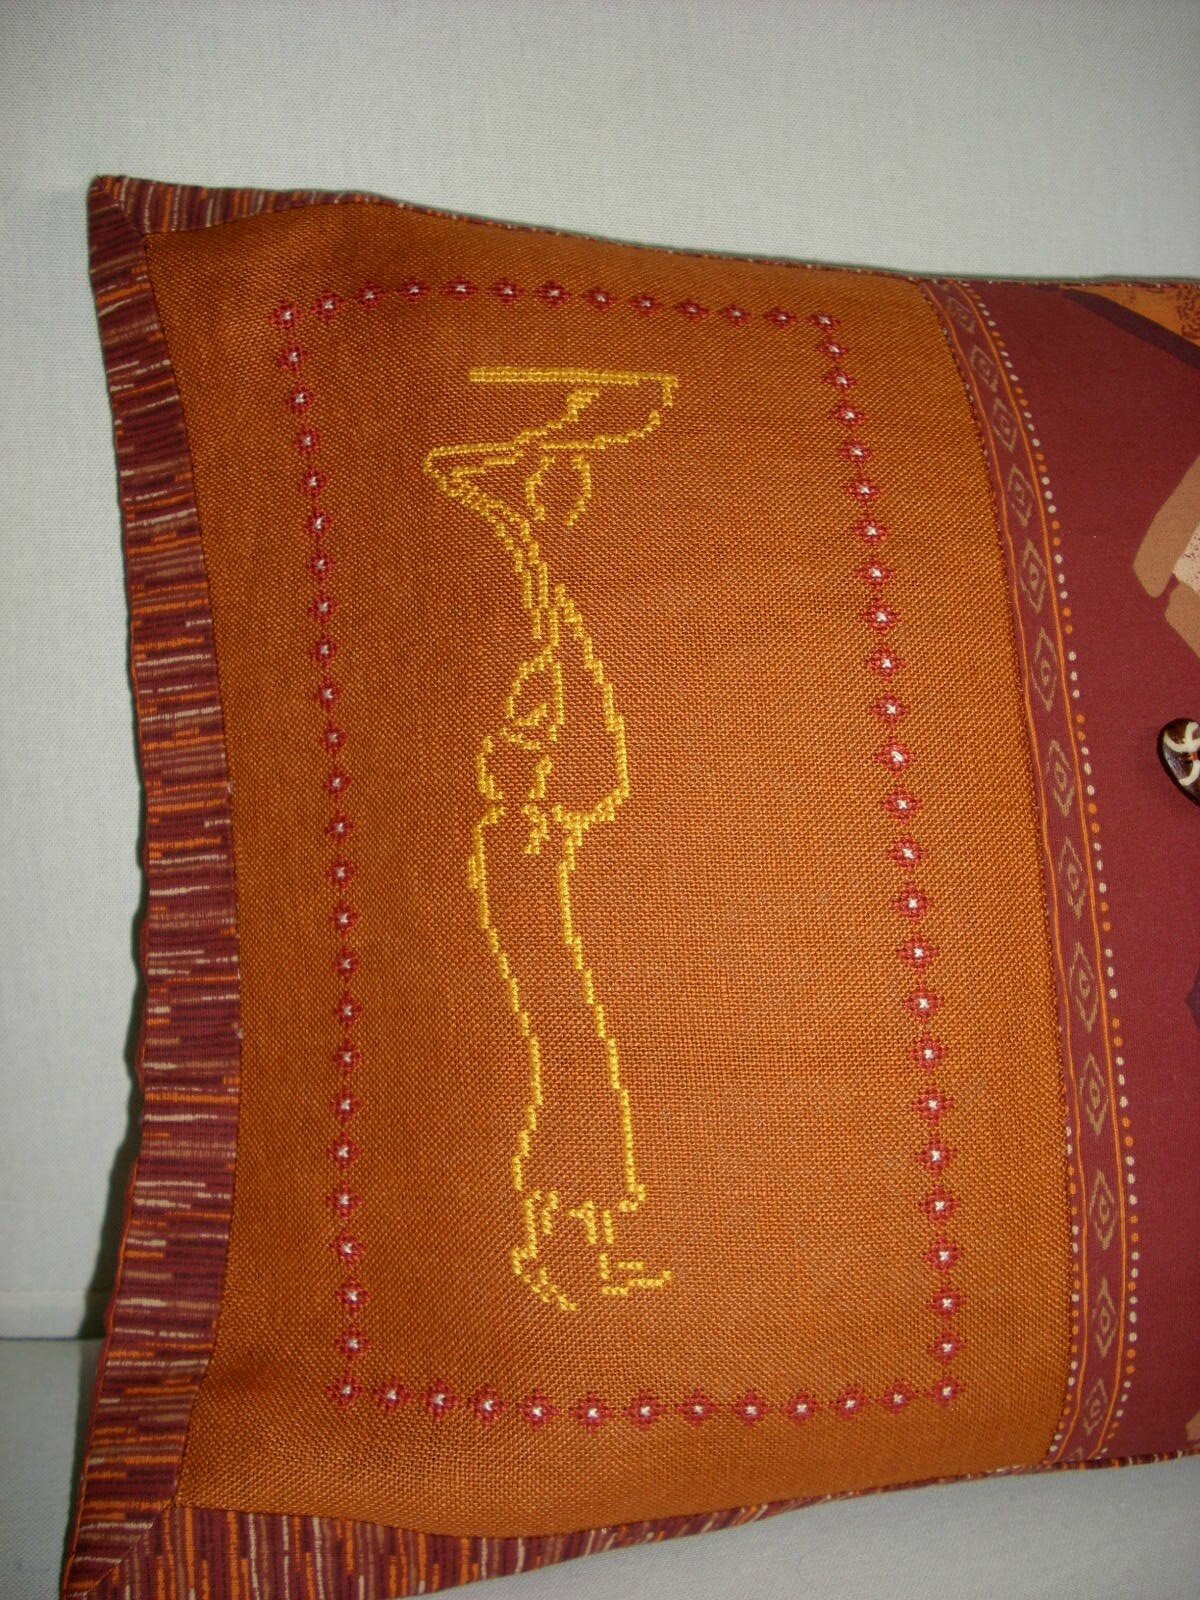 COUSSIN FEMMES AFRICAINES DETAIL 1